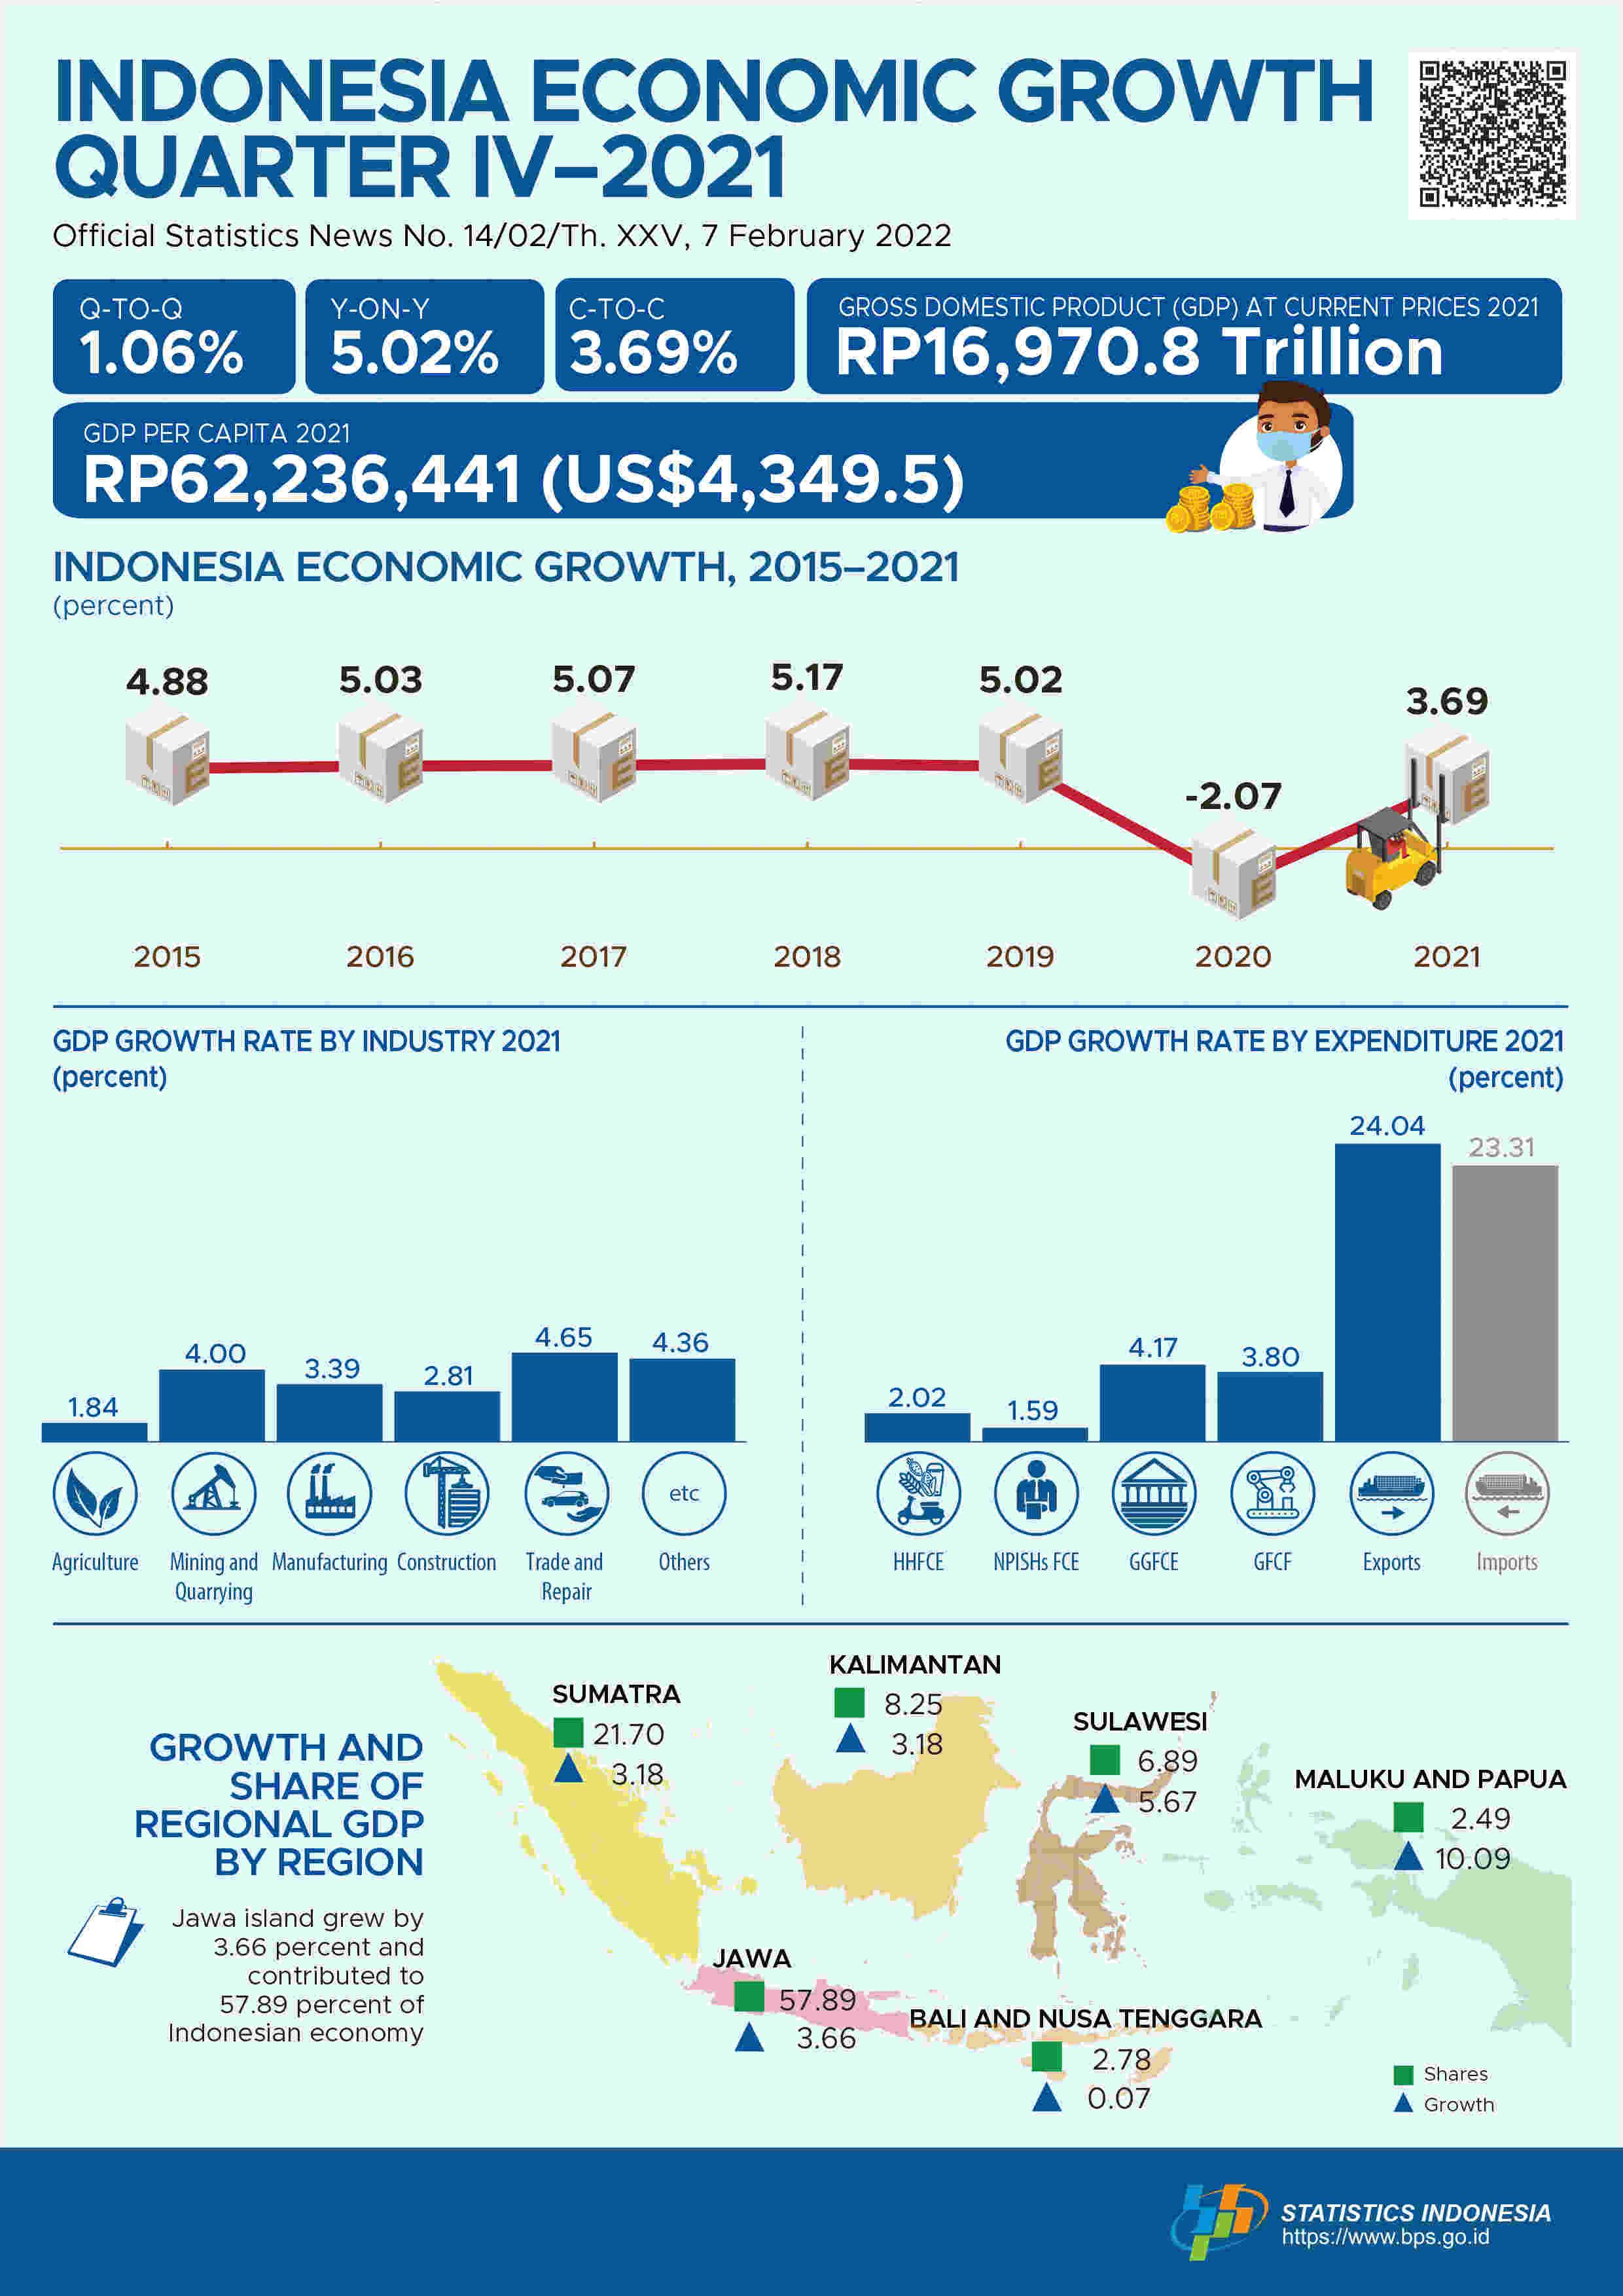 Indonesia GDP Annual Growth Rate 5.02 percent (y-on-y)